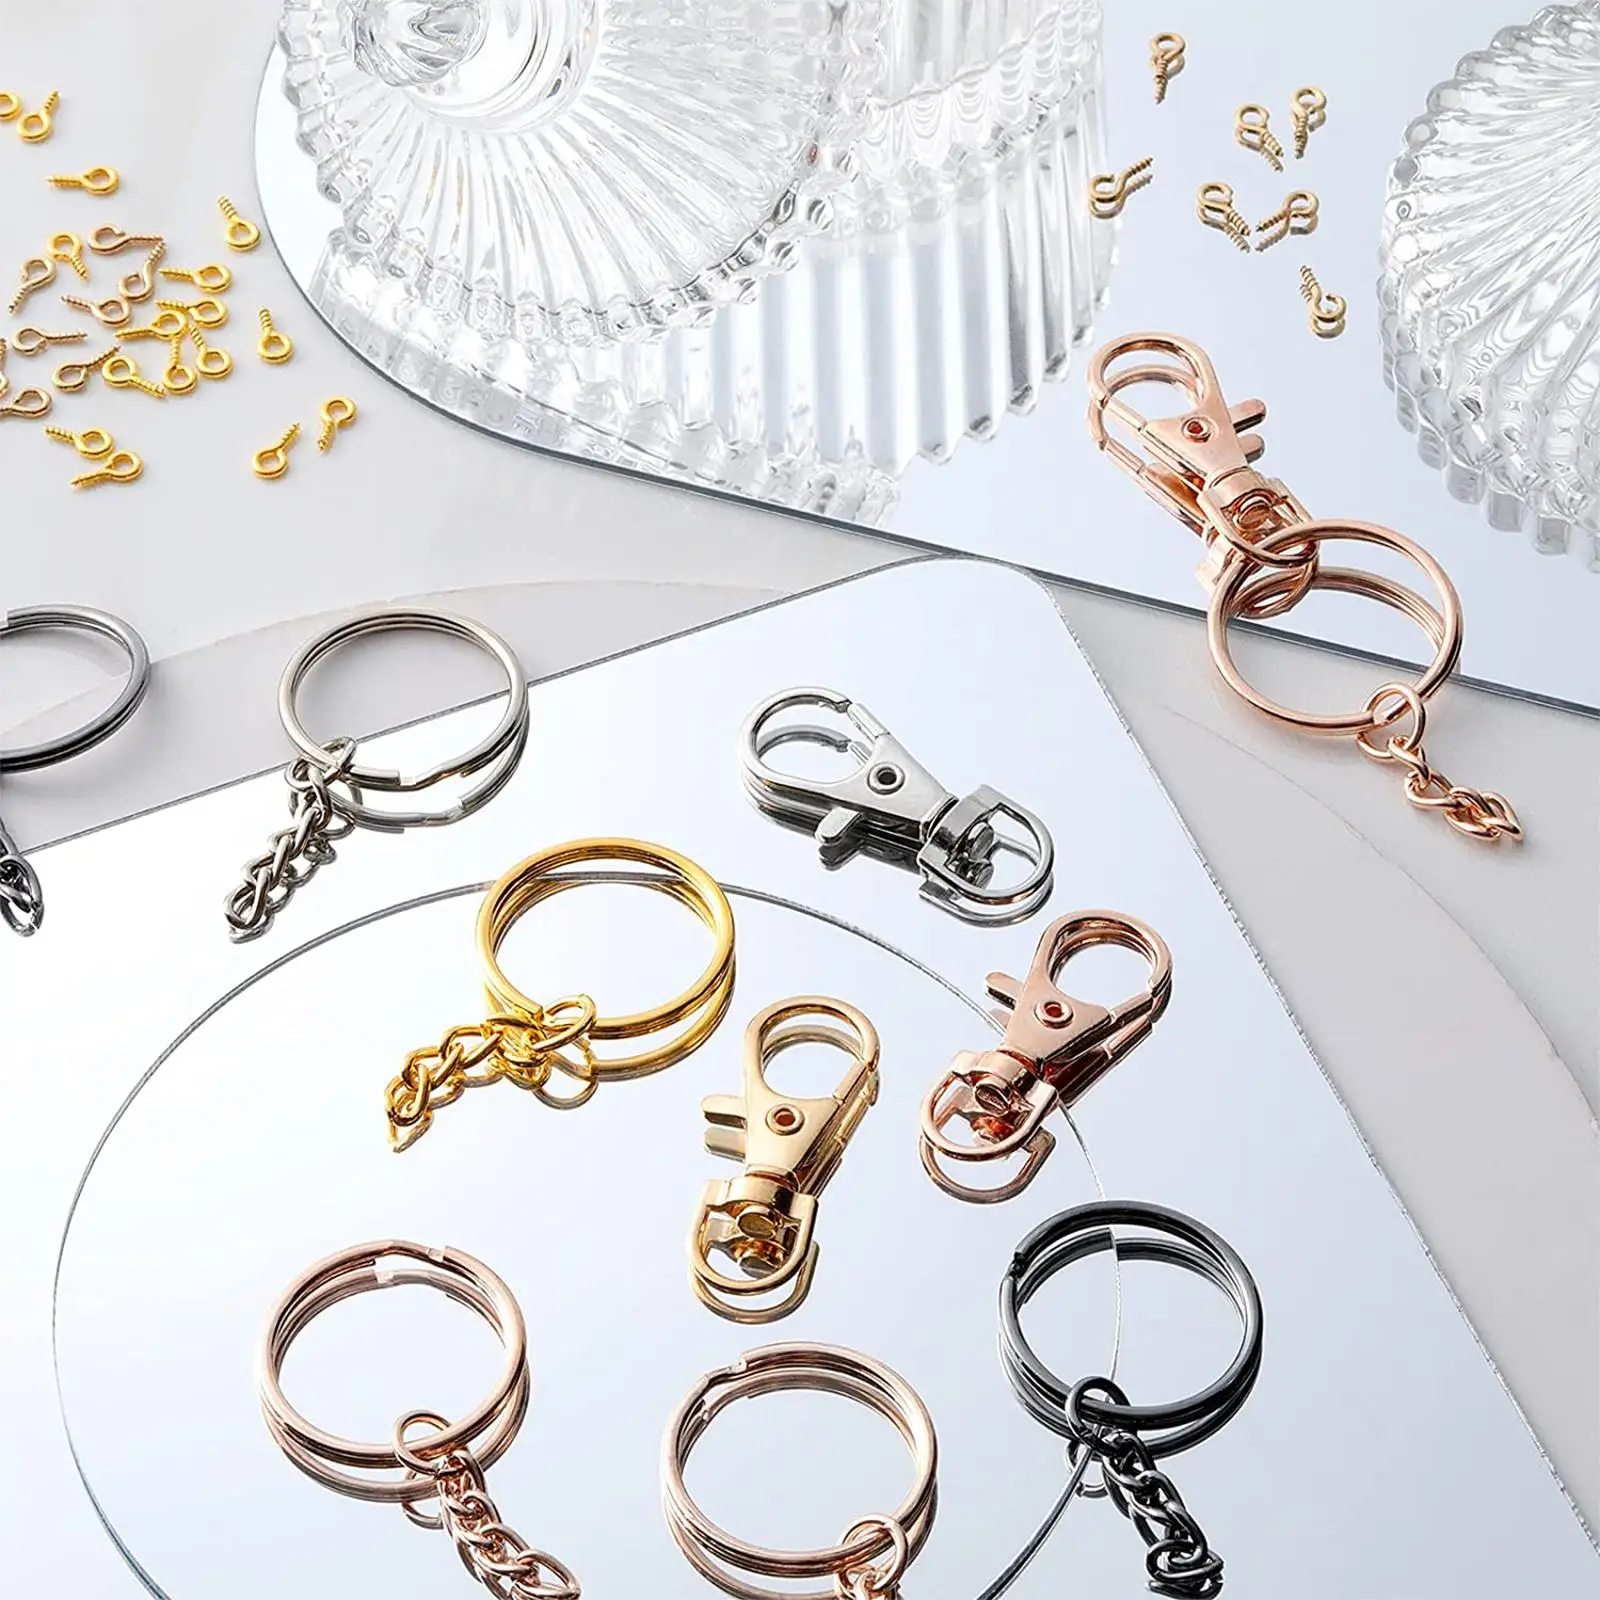 350x Keychain Rings Open Jump Rings with Chain Lobster Clasp Swivel Snap Hooks Keys Lanyard for Accessories Pendants